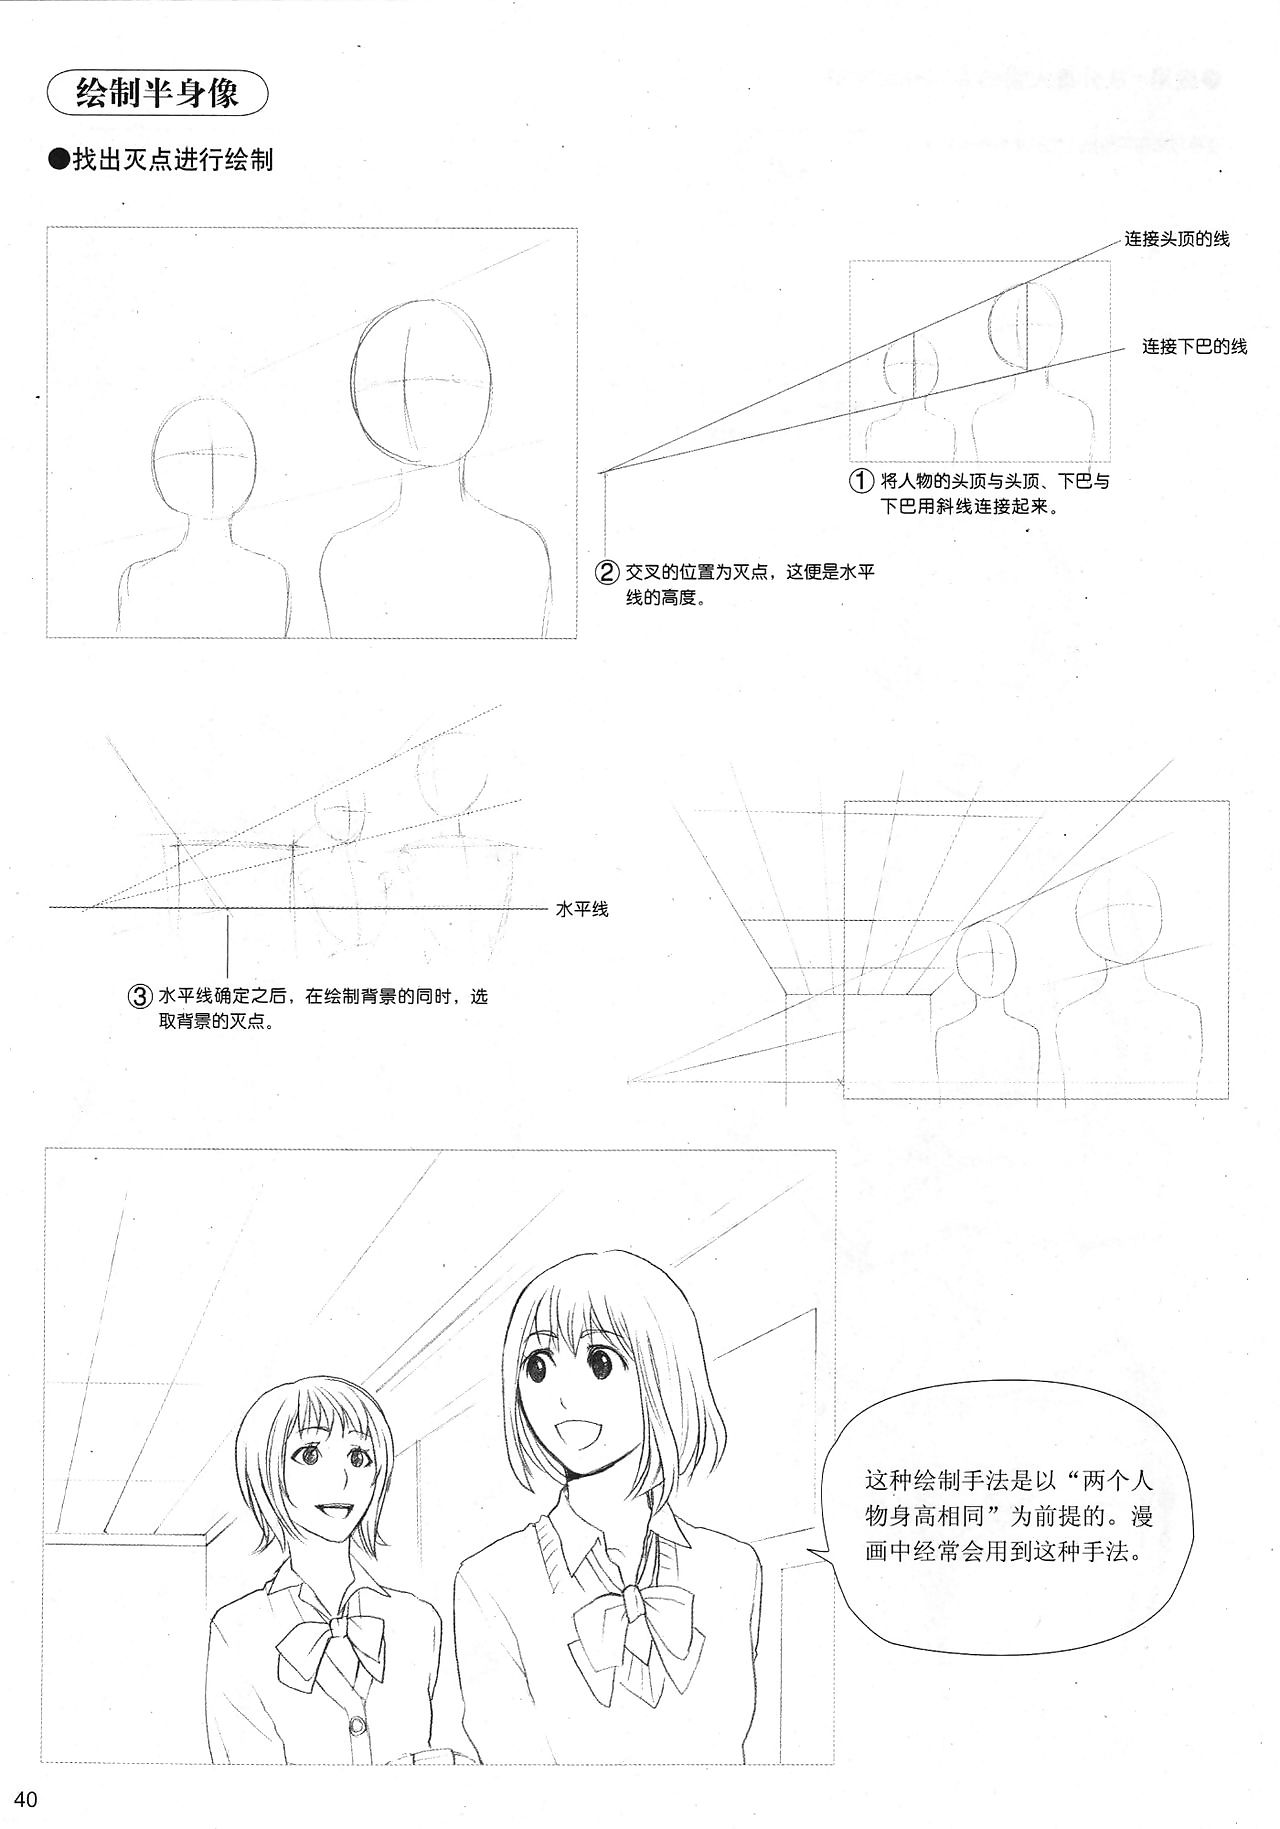 How to Draw Manga: Sketching Manga-Style Volume 4: All About Perspective - part 3